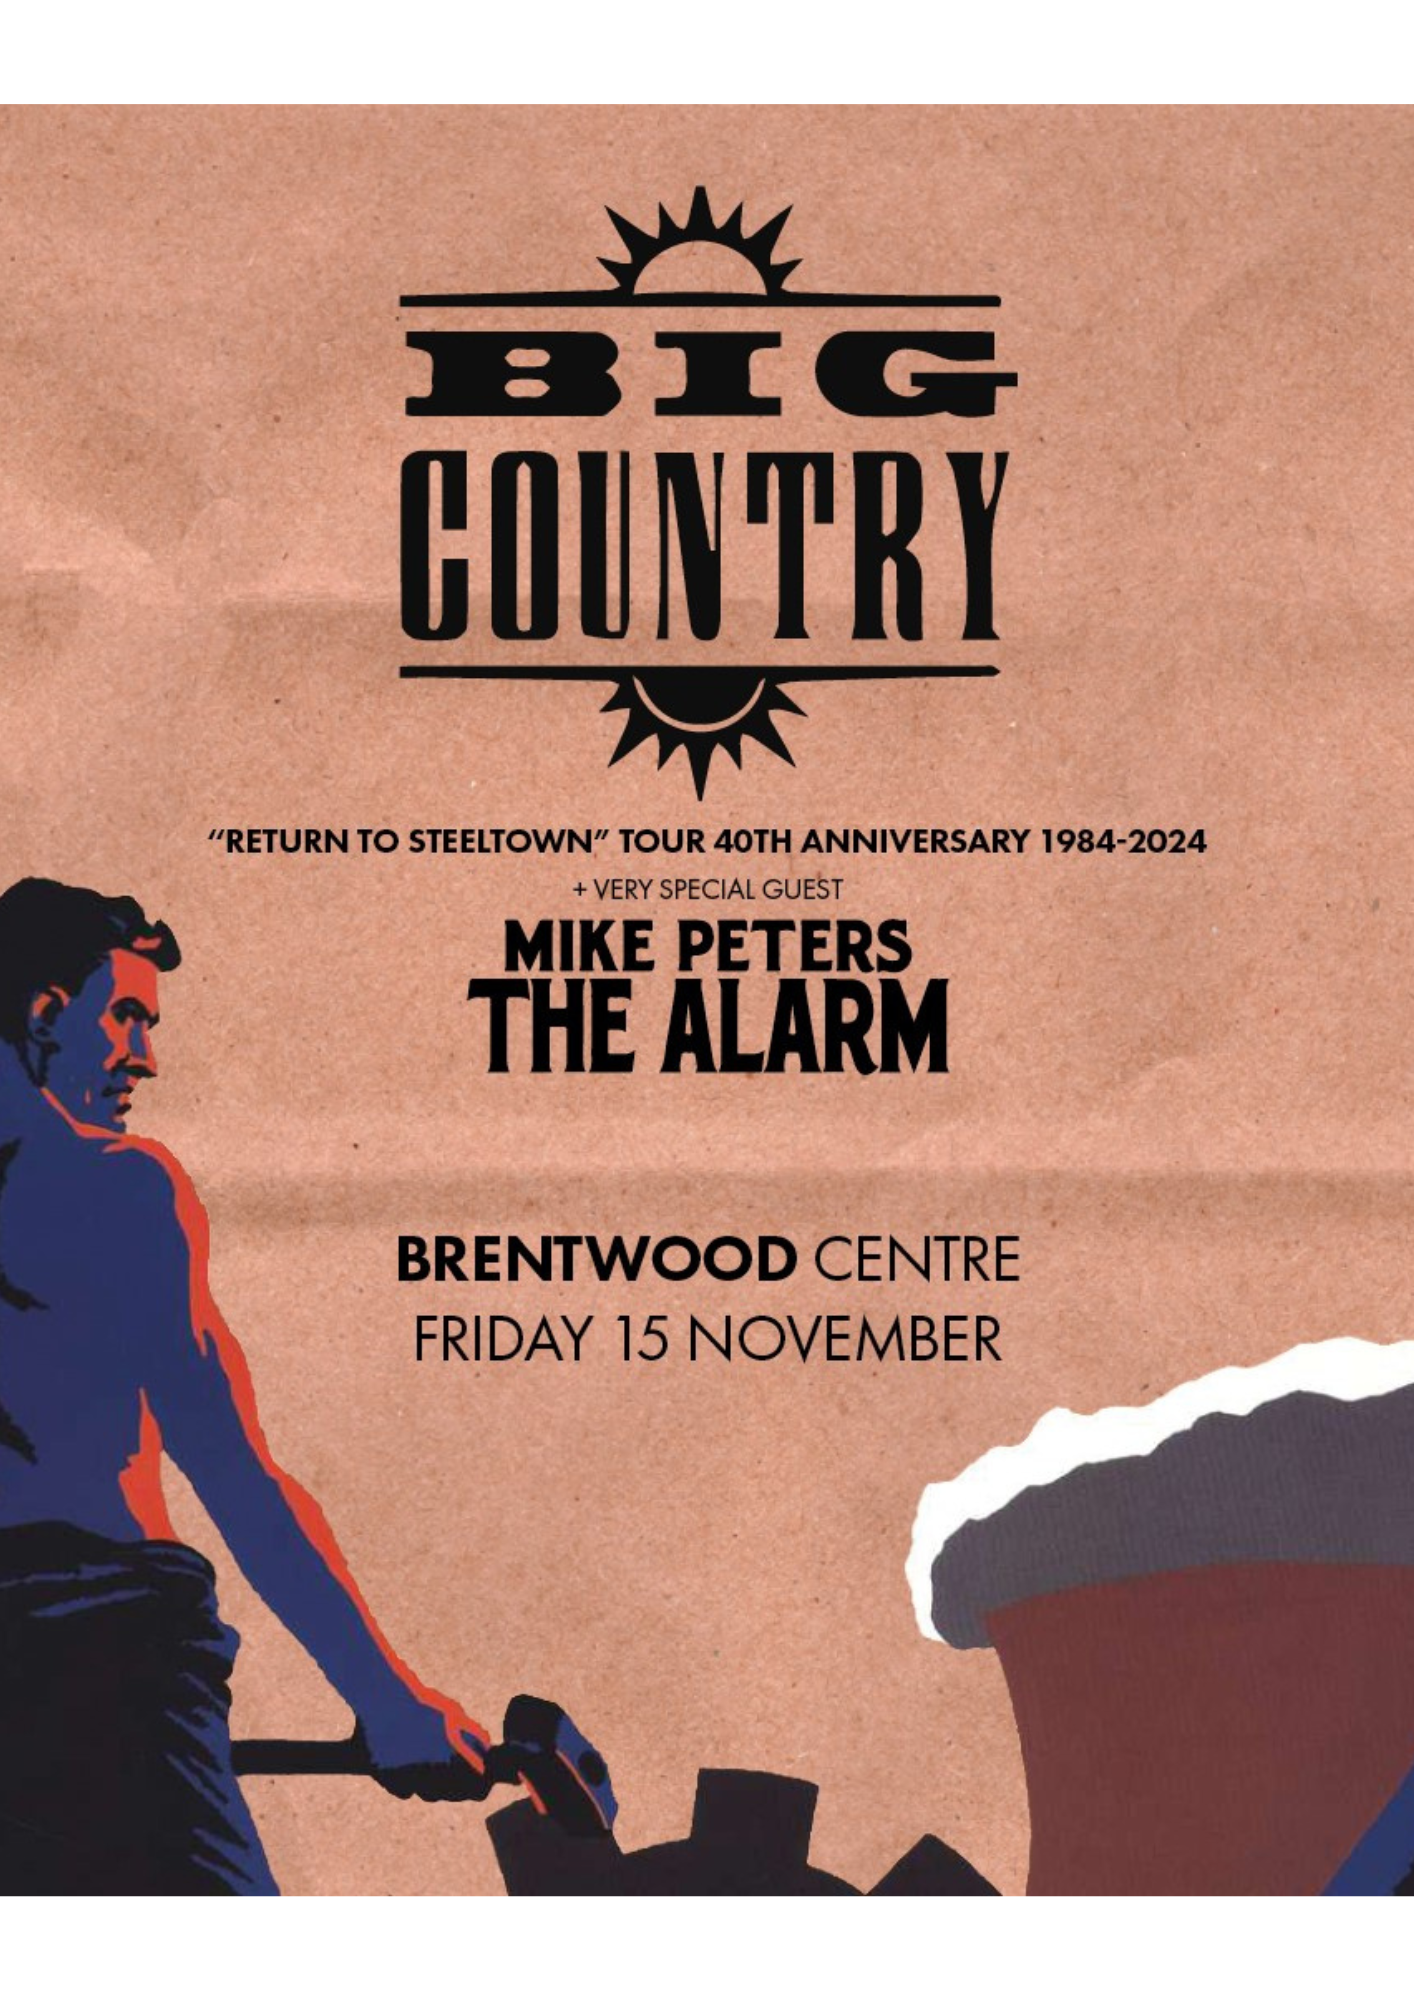 Big Country 'Return to Steeltown' Tour